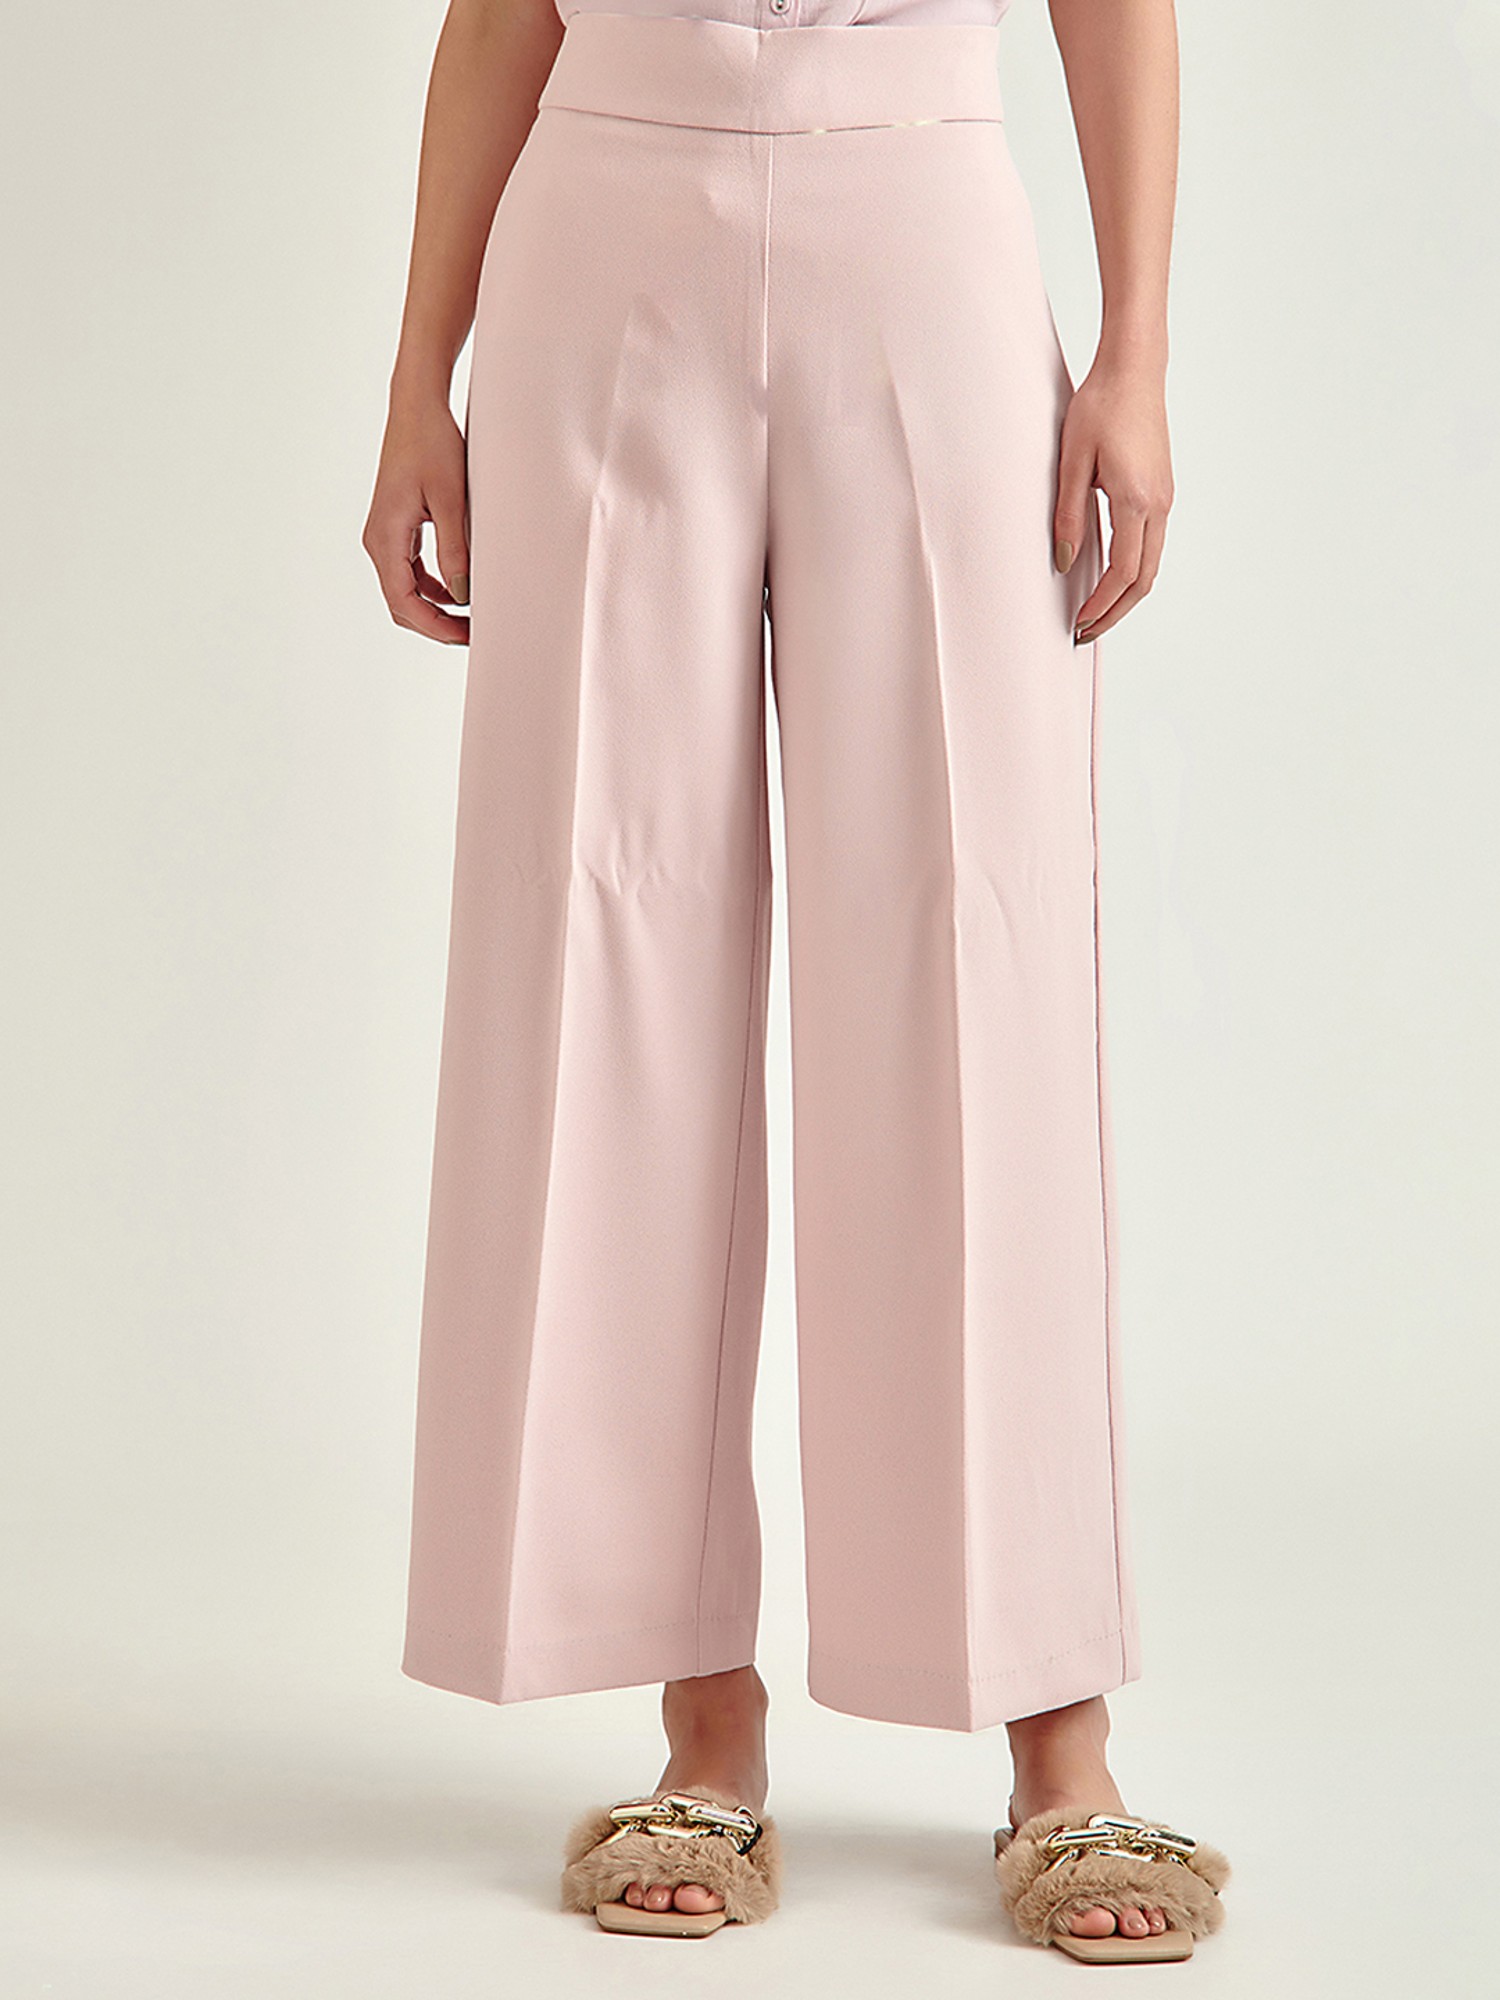 10 Stylish Designs of Pink Trousers for Men and Women in Fashion